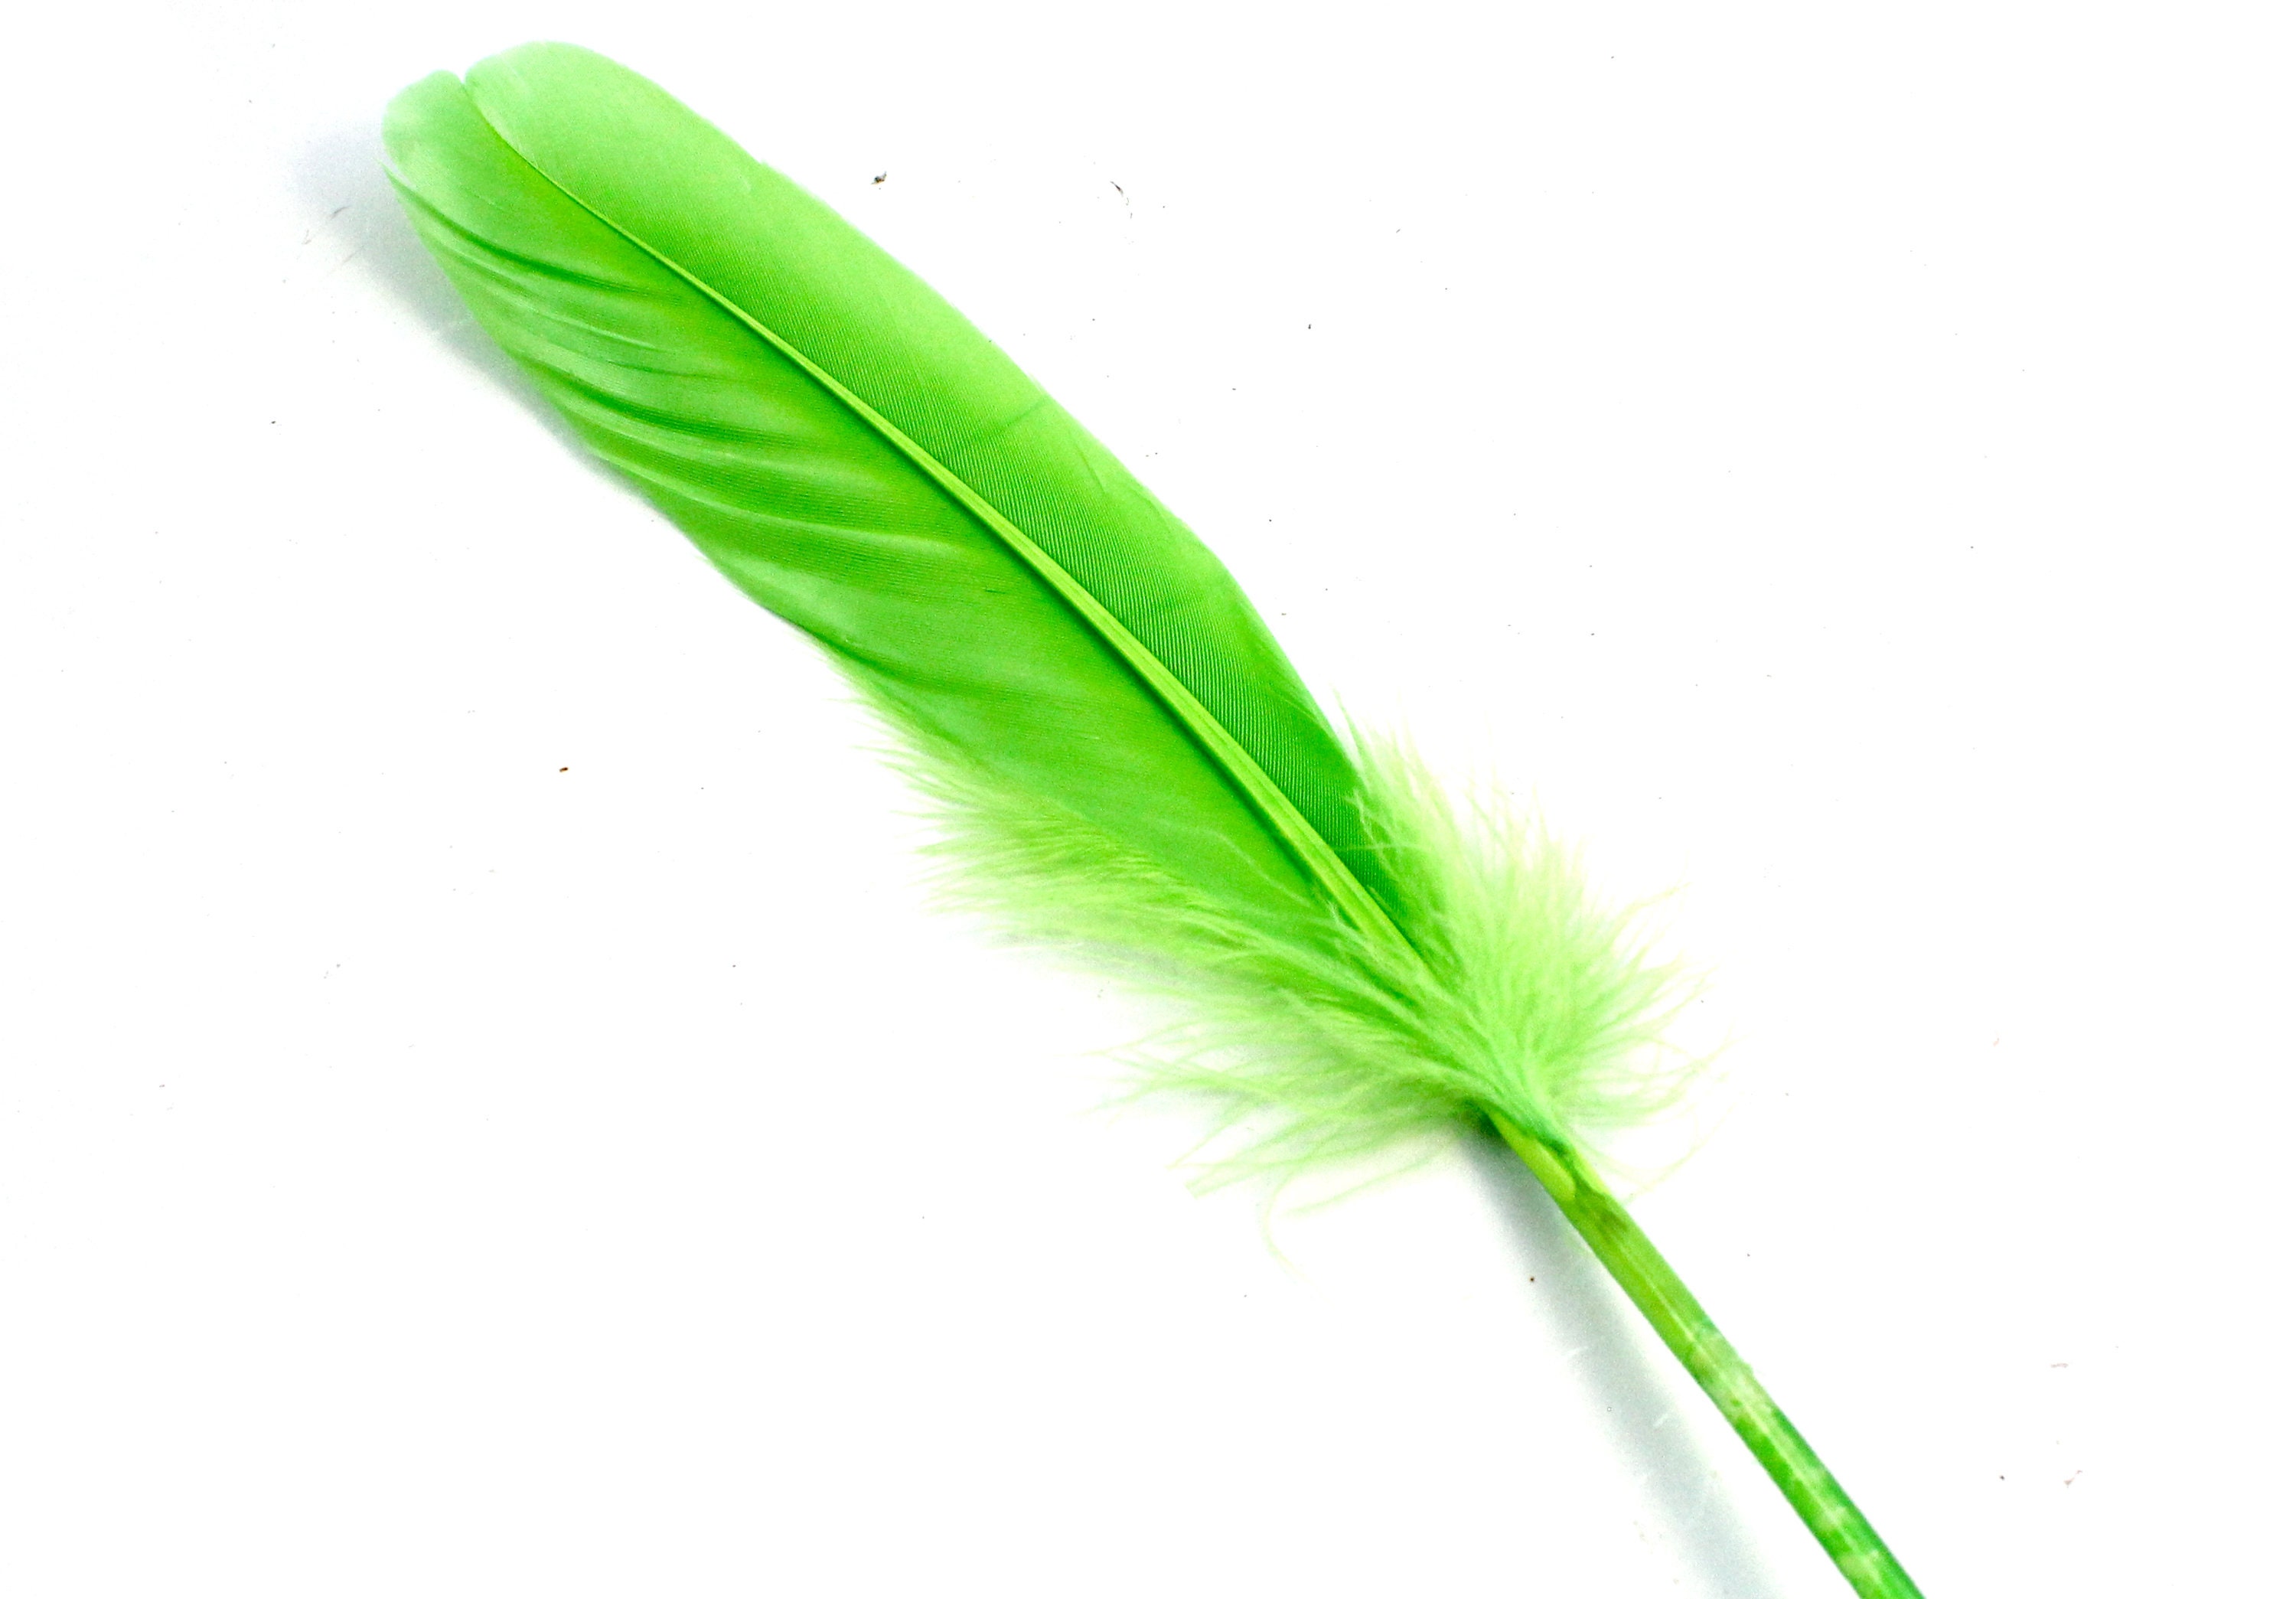 7-9 Inch Lime Green Duck Feathers 10 Light Green Feathers for Making Masks.  Green Bird Feathers. Green Goose Feathers. Green Costume 